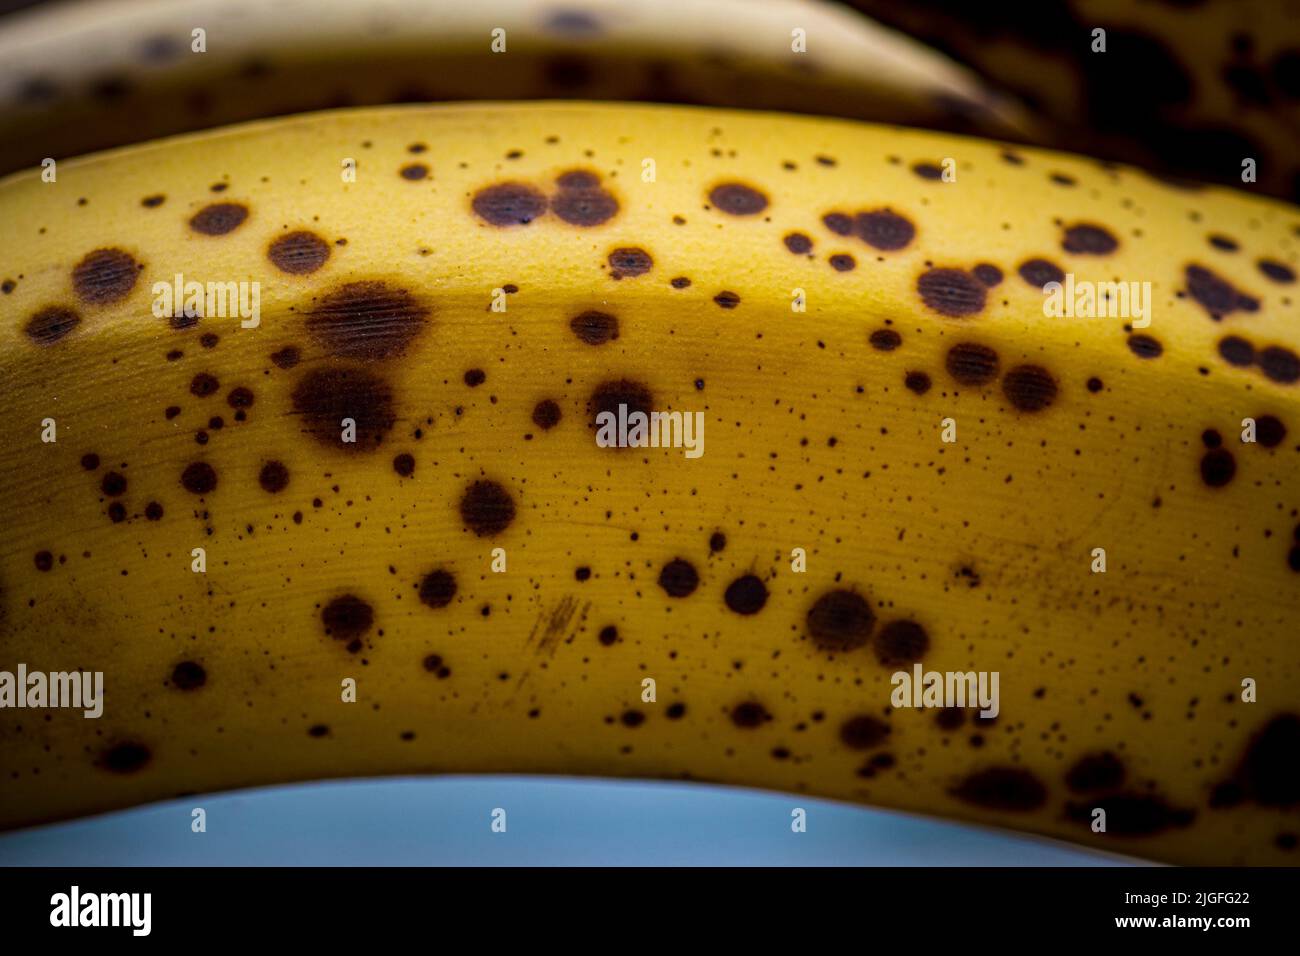 Closeup of banana ripening stage with spots, sweet flavor, perfect for blender drinks an baking Stock Photo